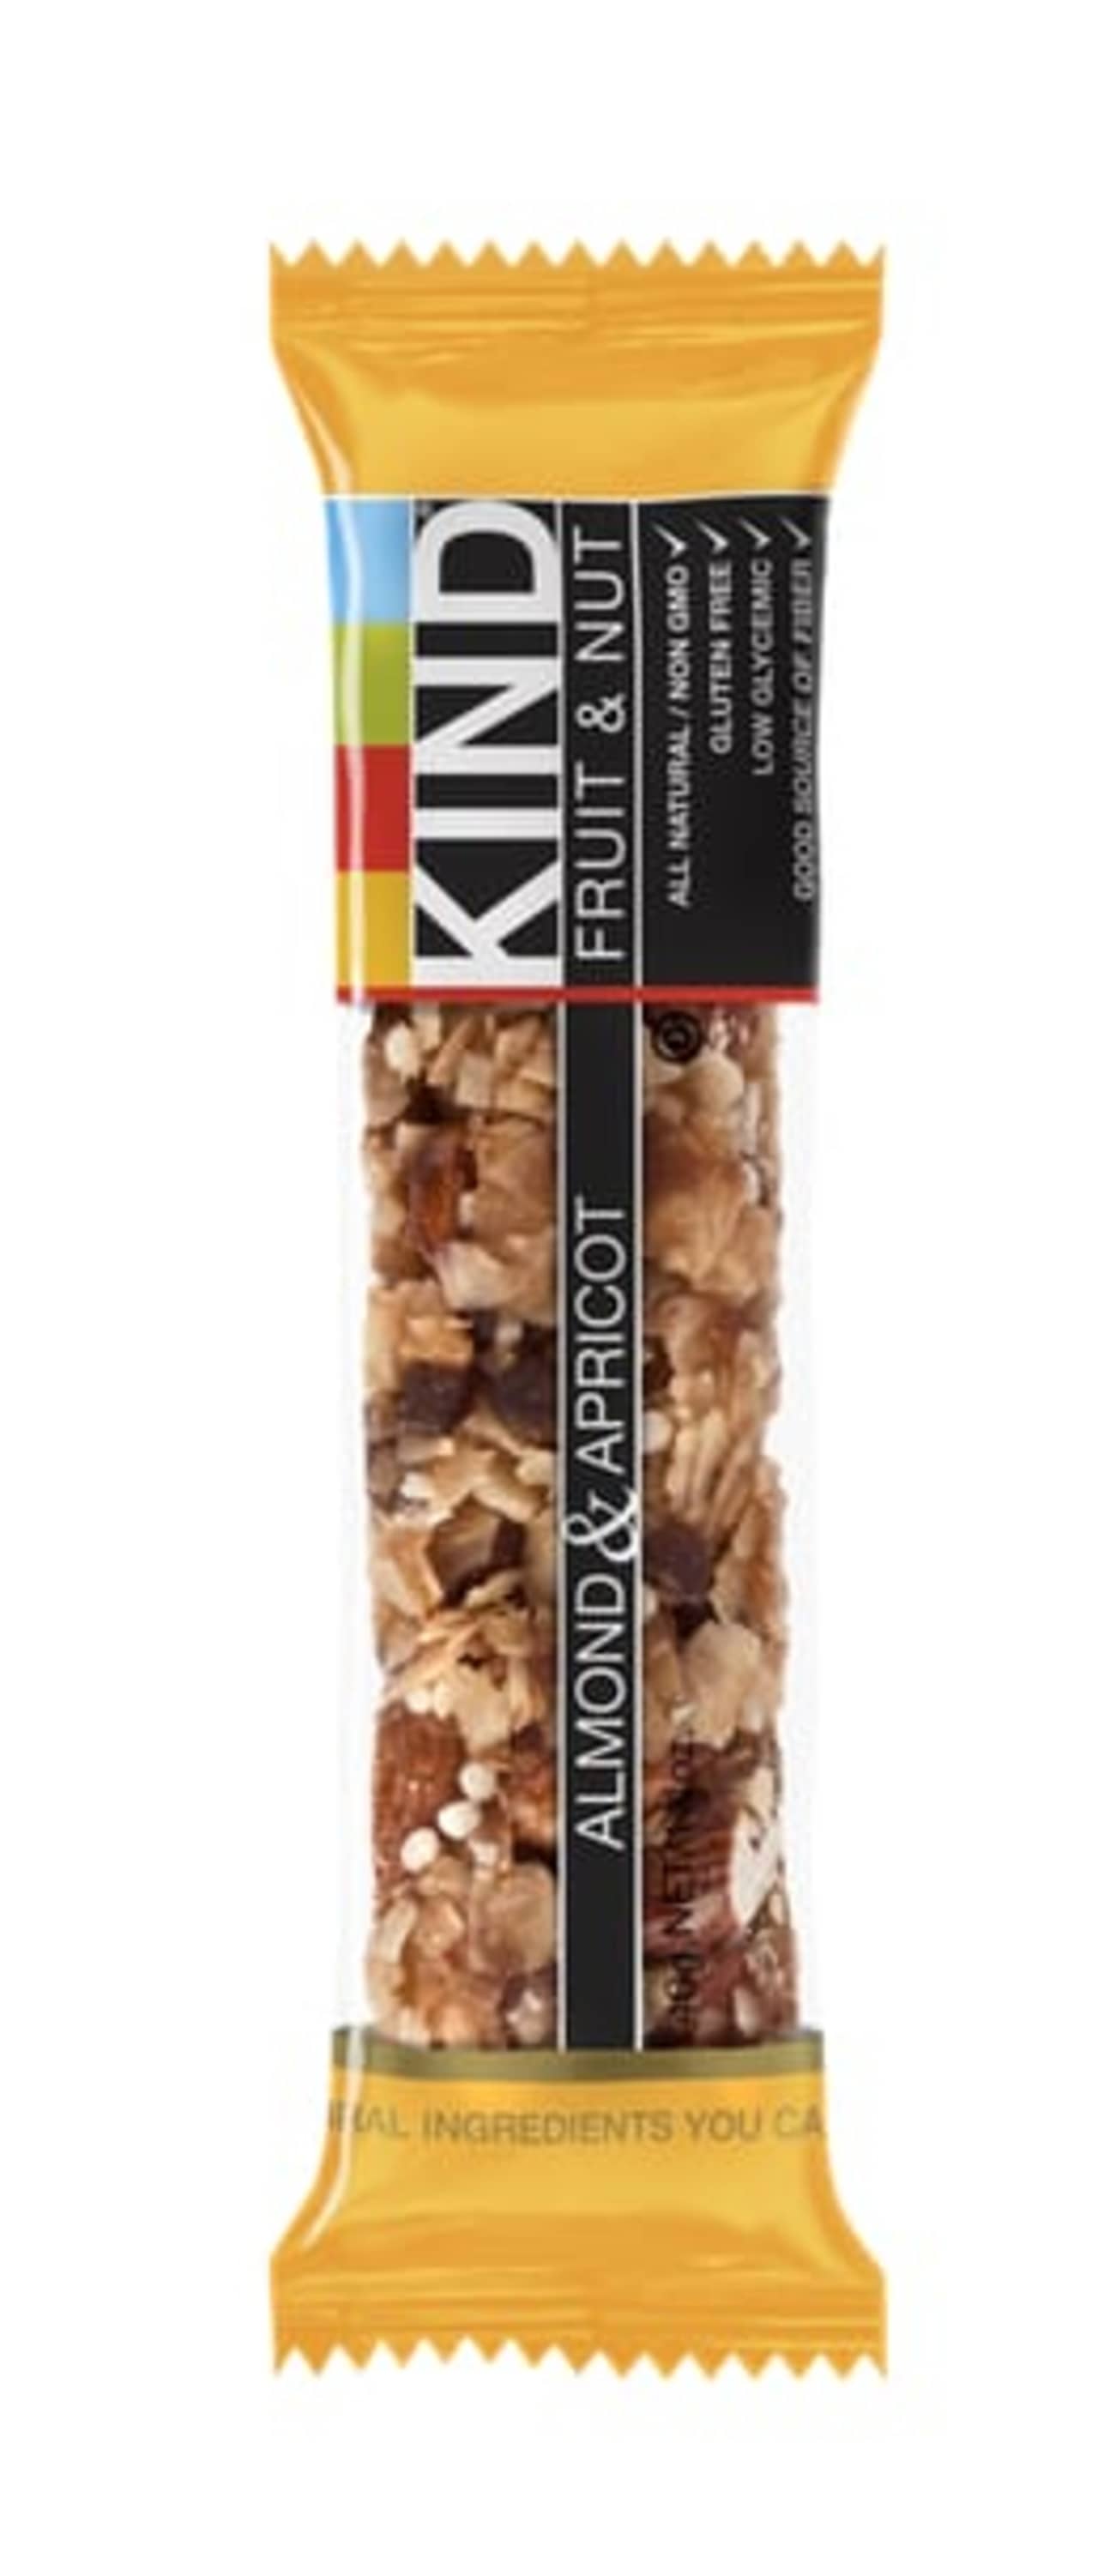 Several varieties of Kind bars fail to meet the FDA regulations to be labeled "healthy."